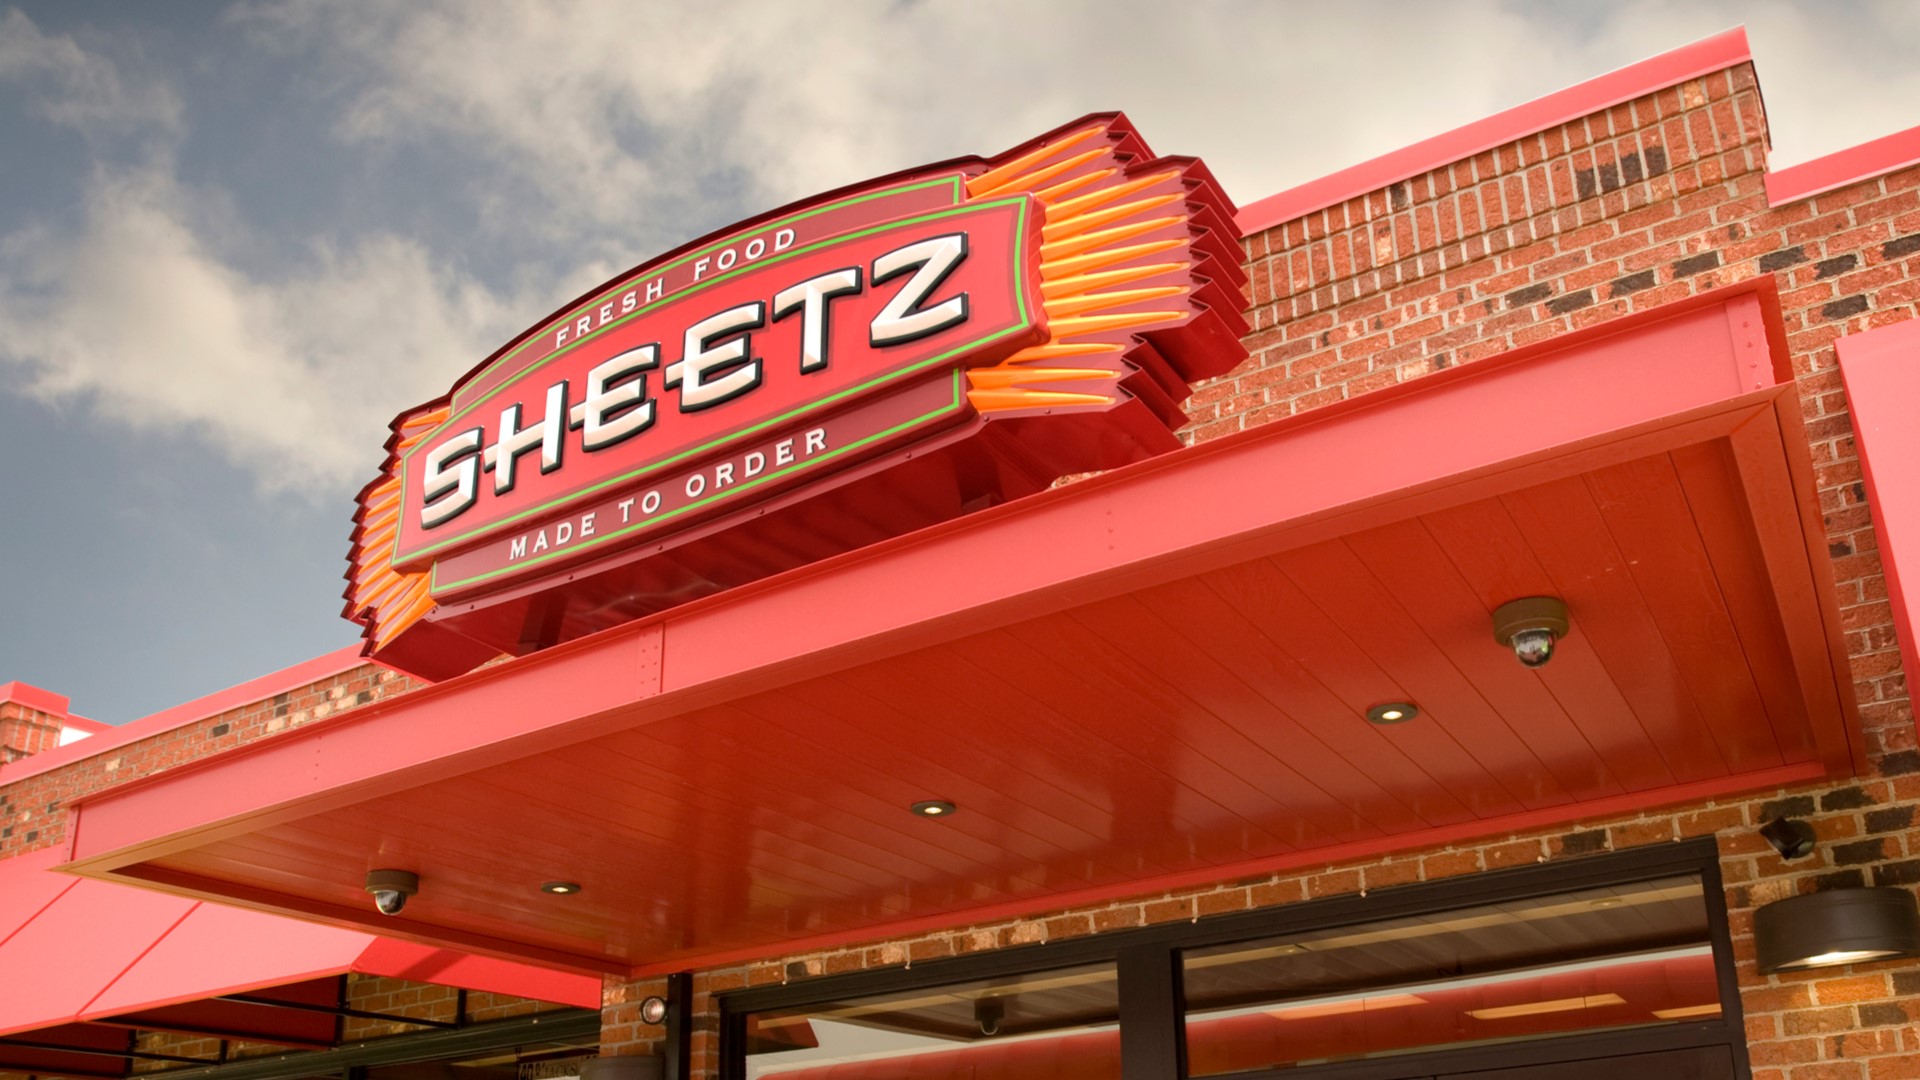 Sheetz breaks ground for two locations in Columbus | 10tv.com